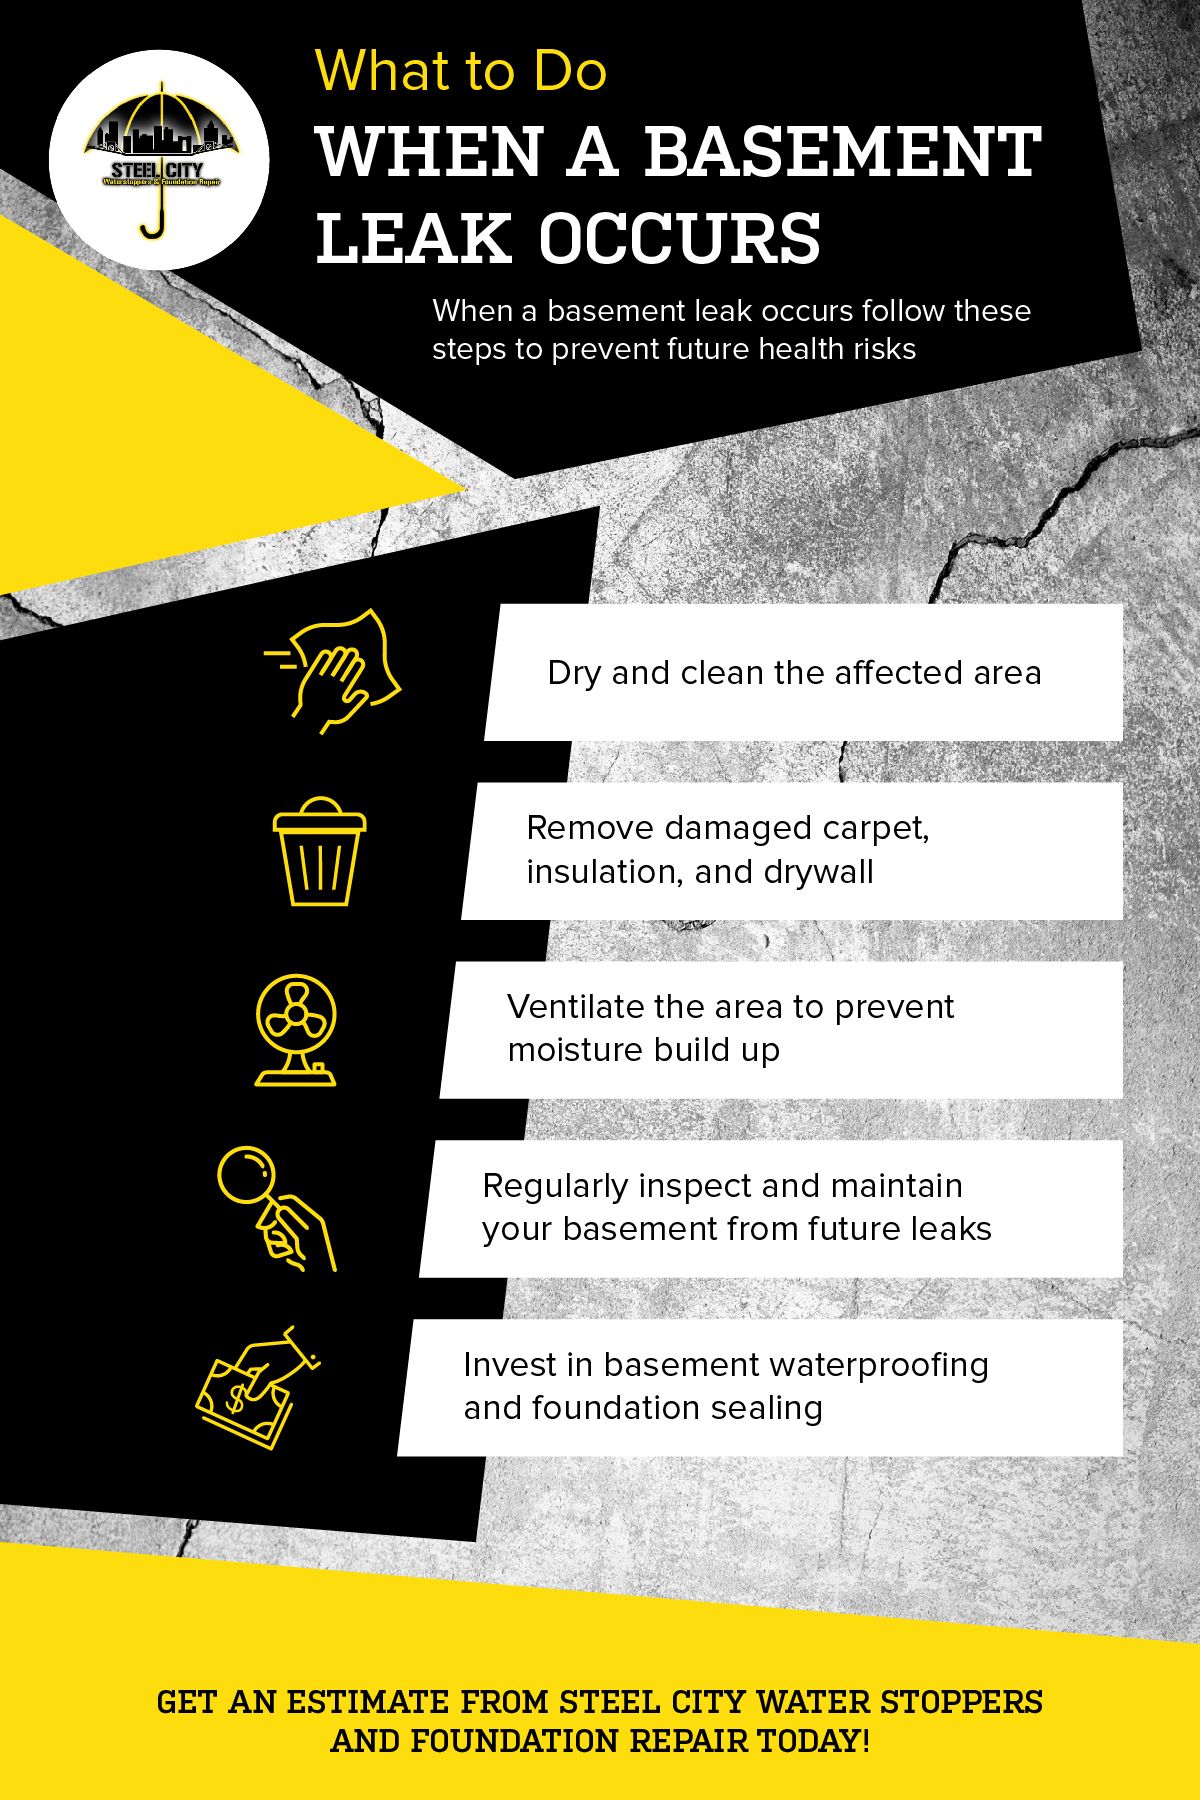 SteelCity_M38020-Infographic_What-To-Do-When-A-Basement-Leak-Occurs-01.jpg